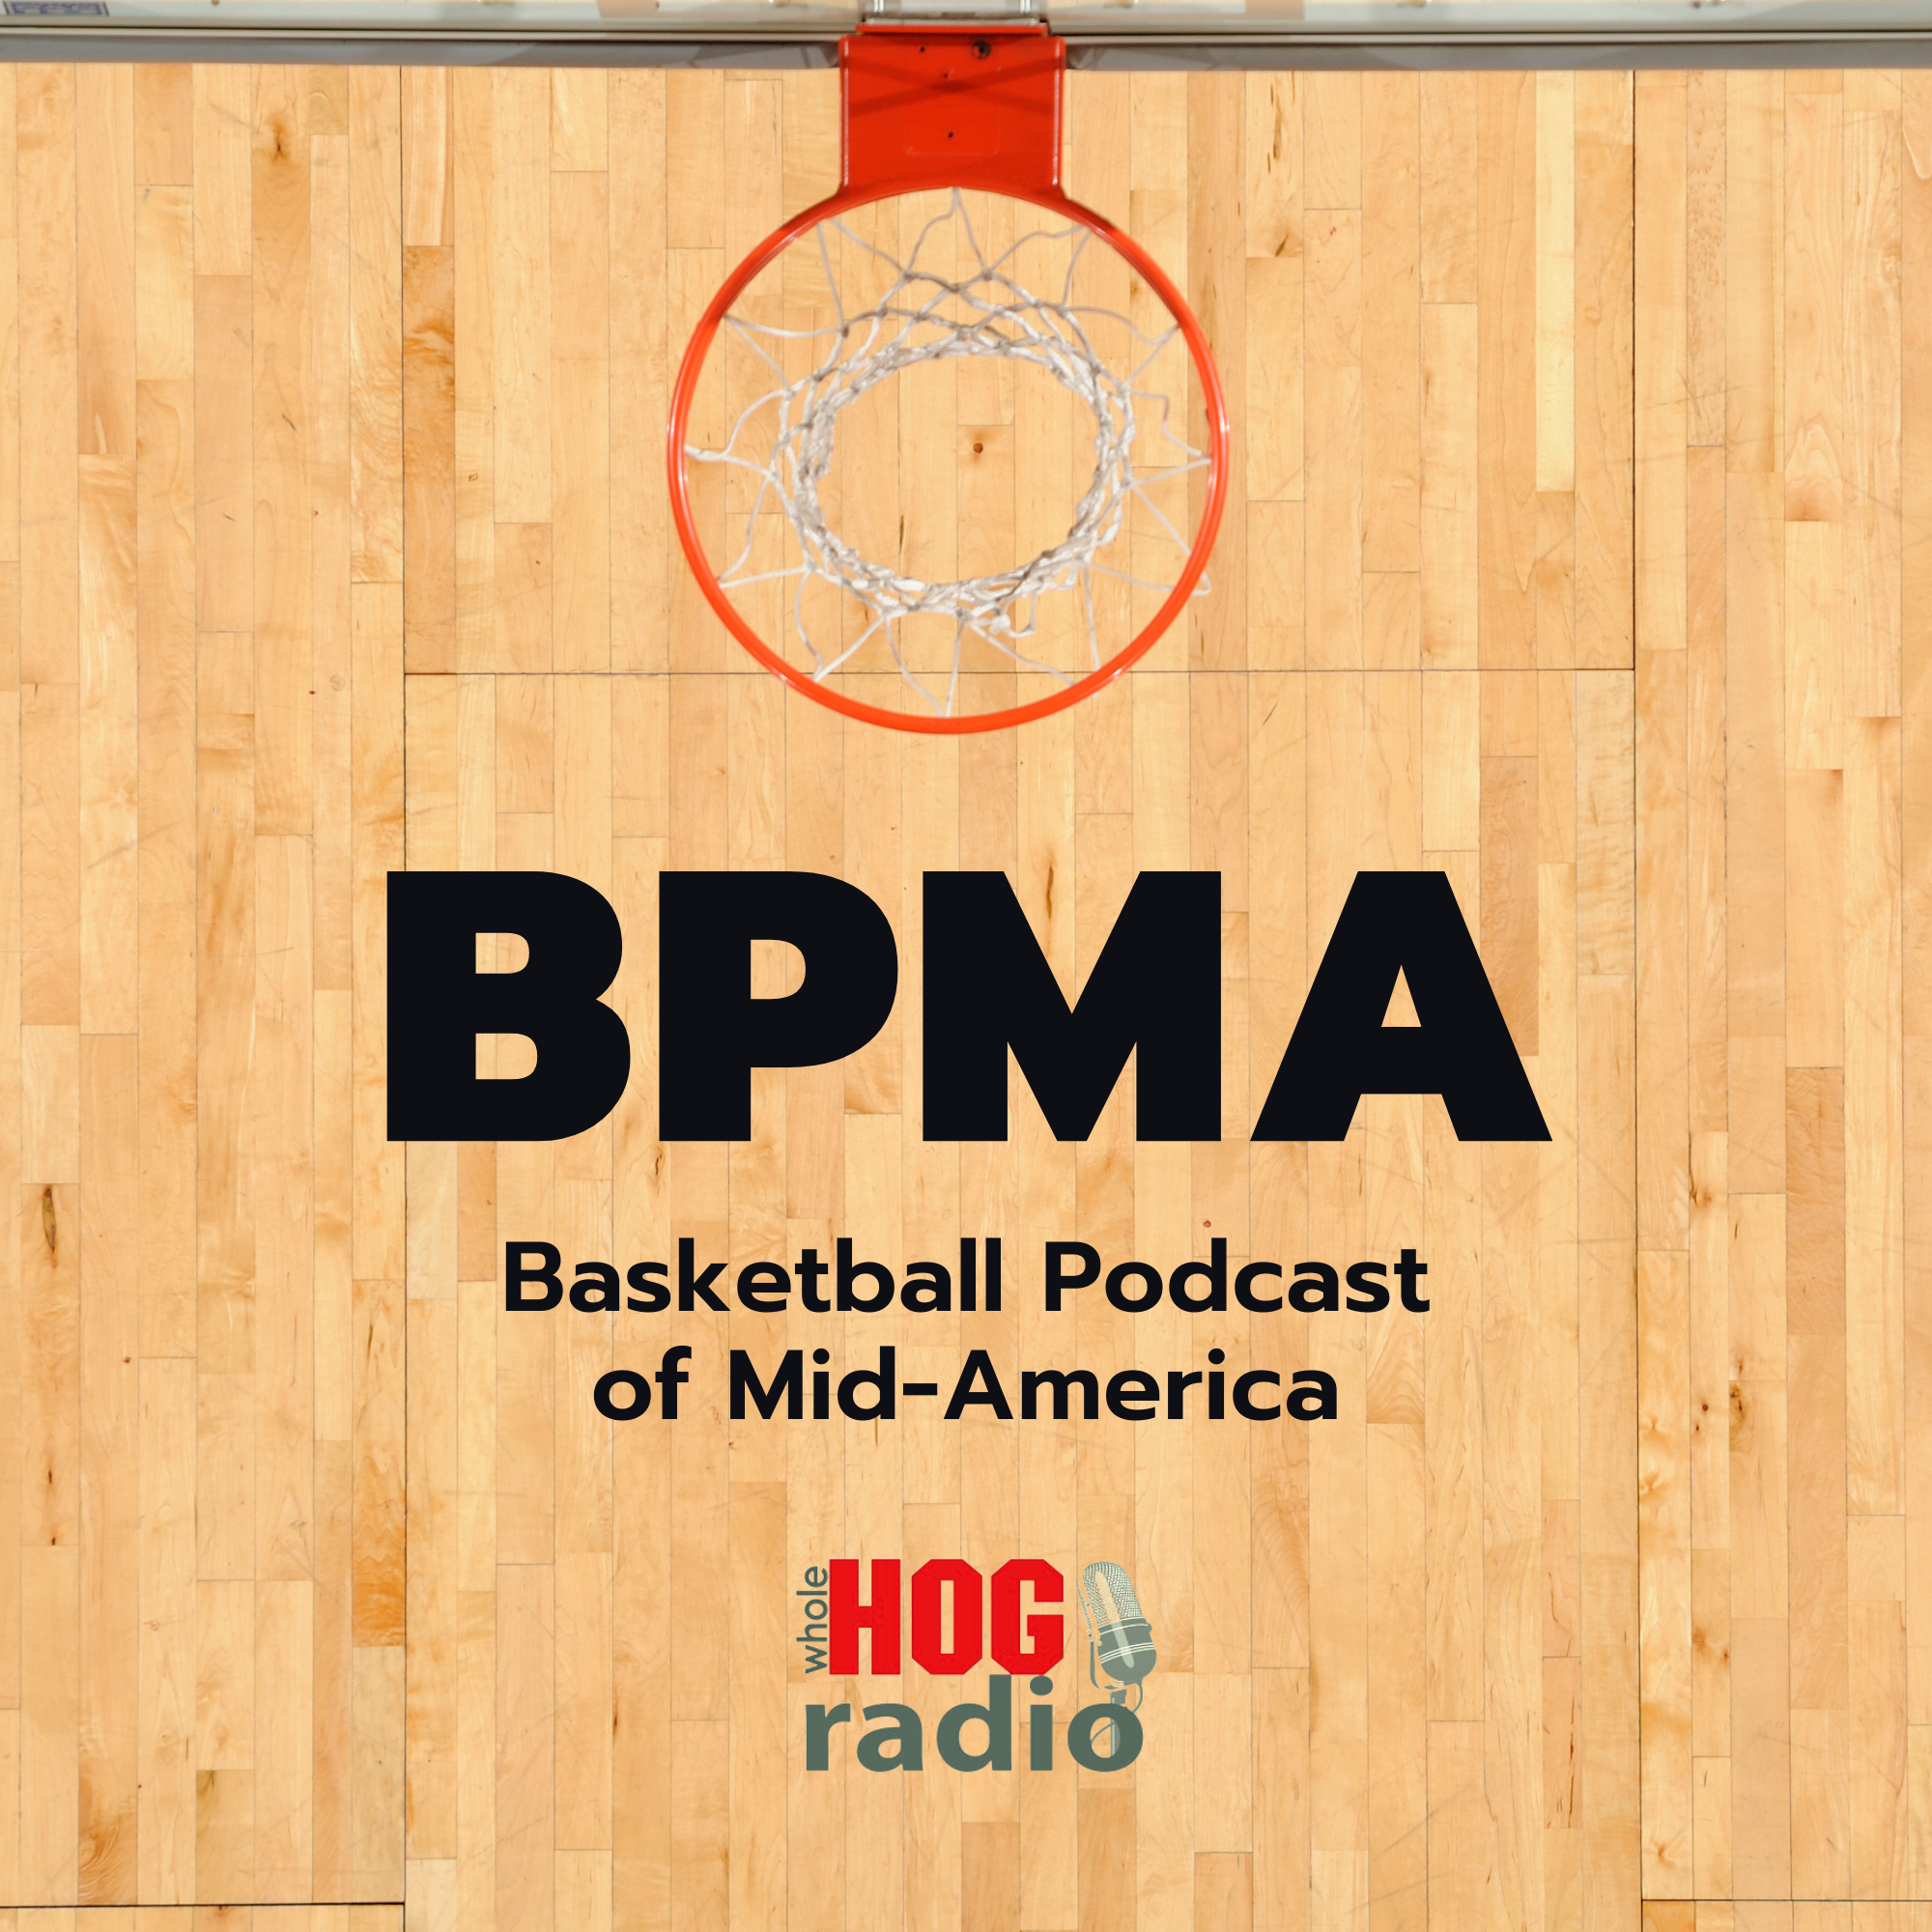 Basketball Podcast of Mid-America: It’s Getting Tough to Watch